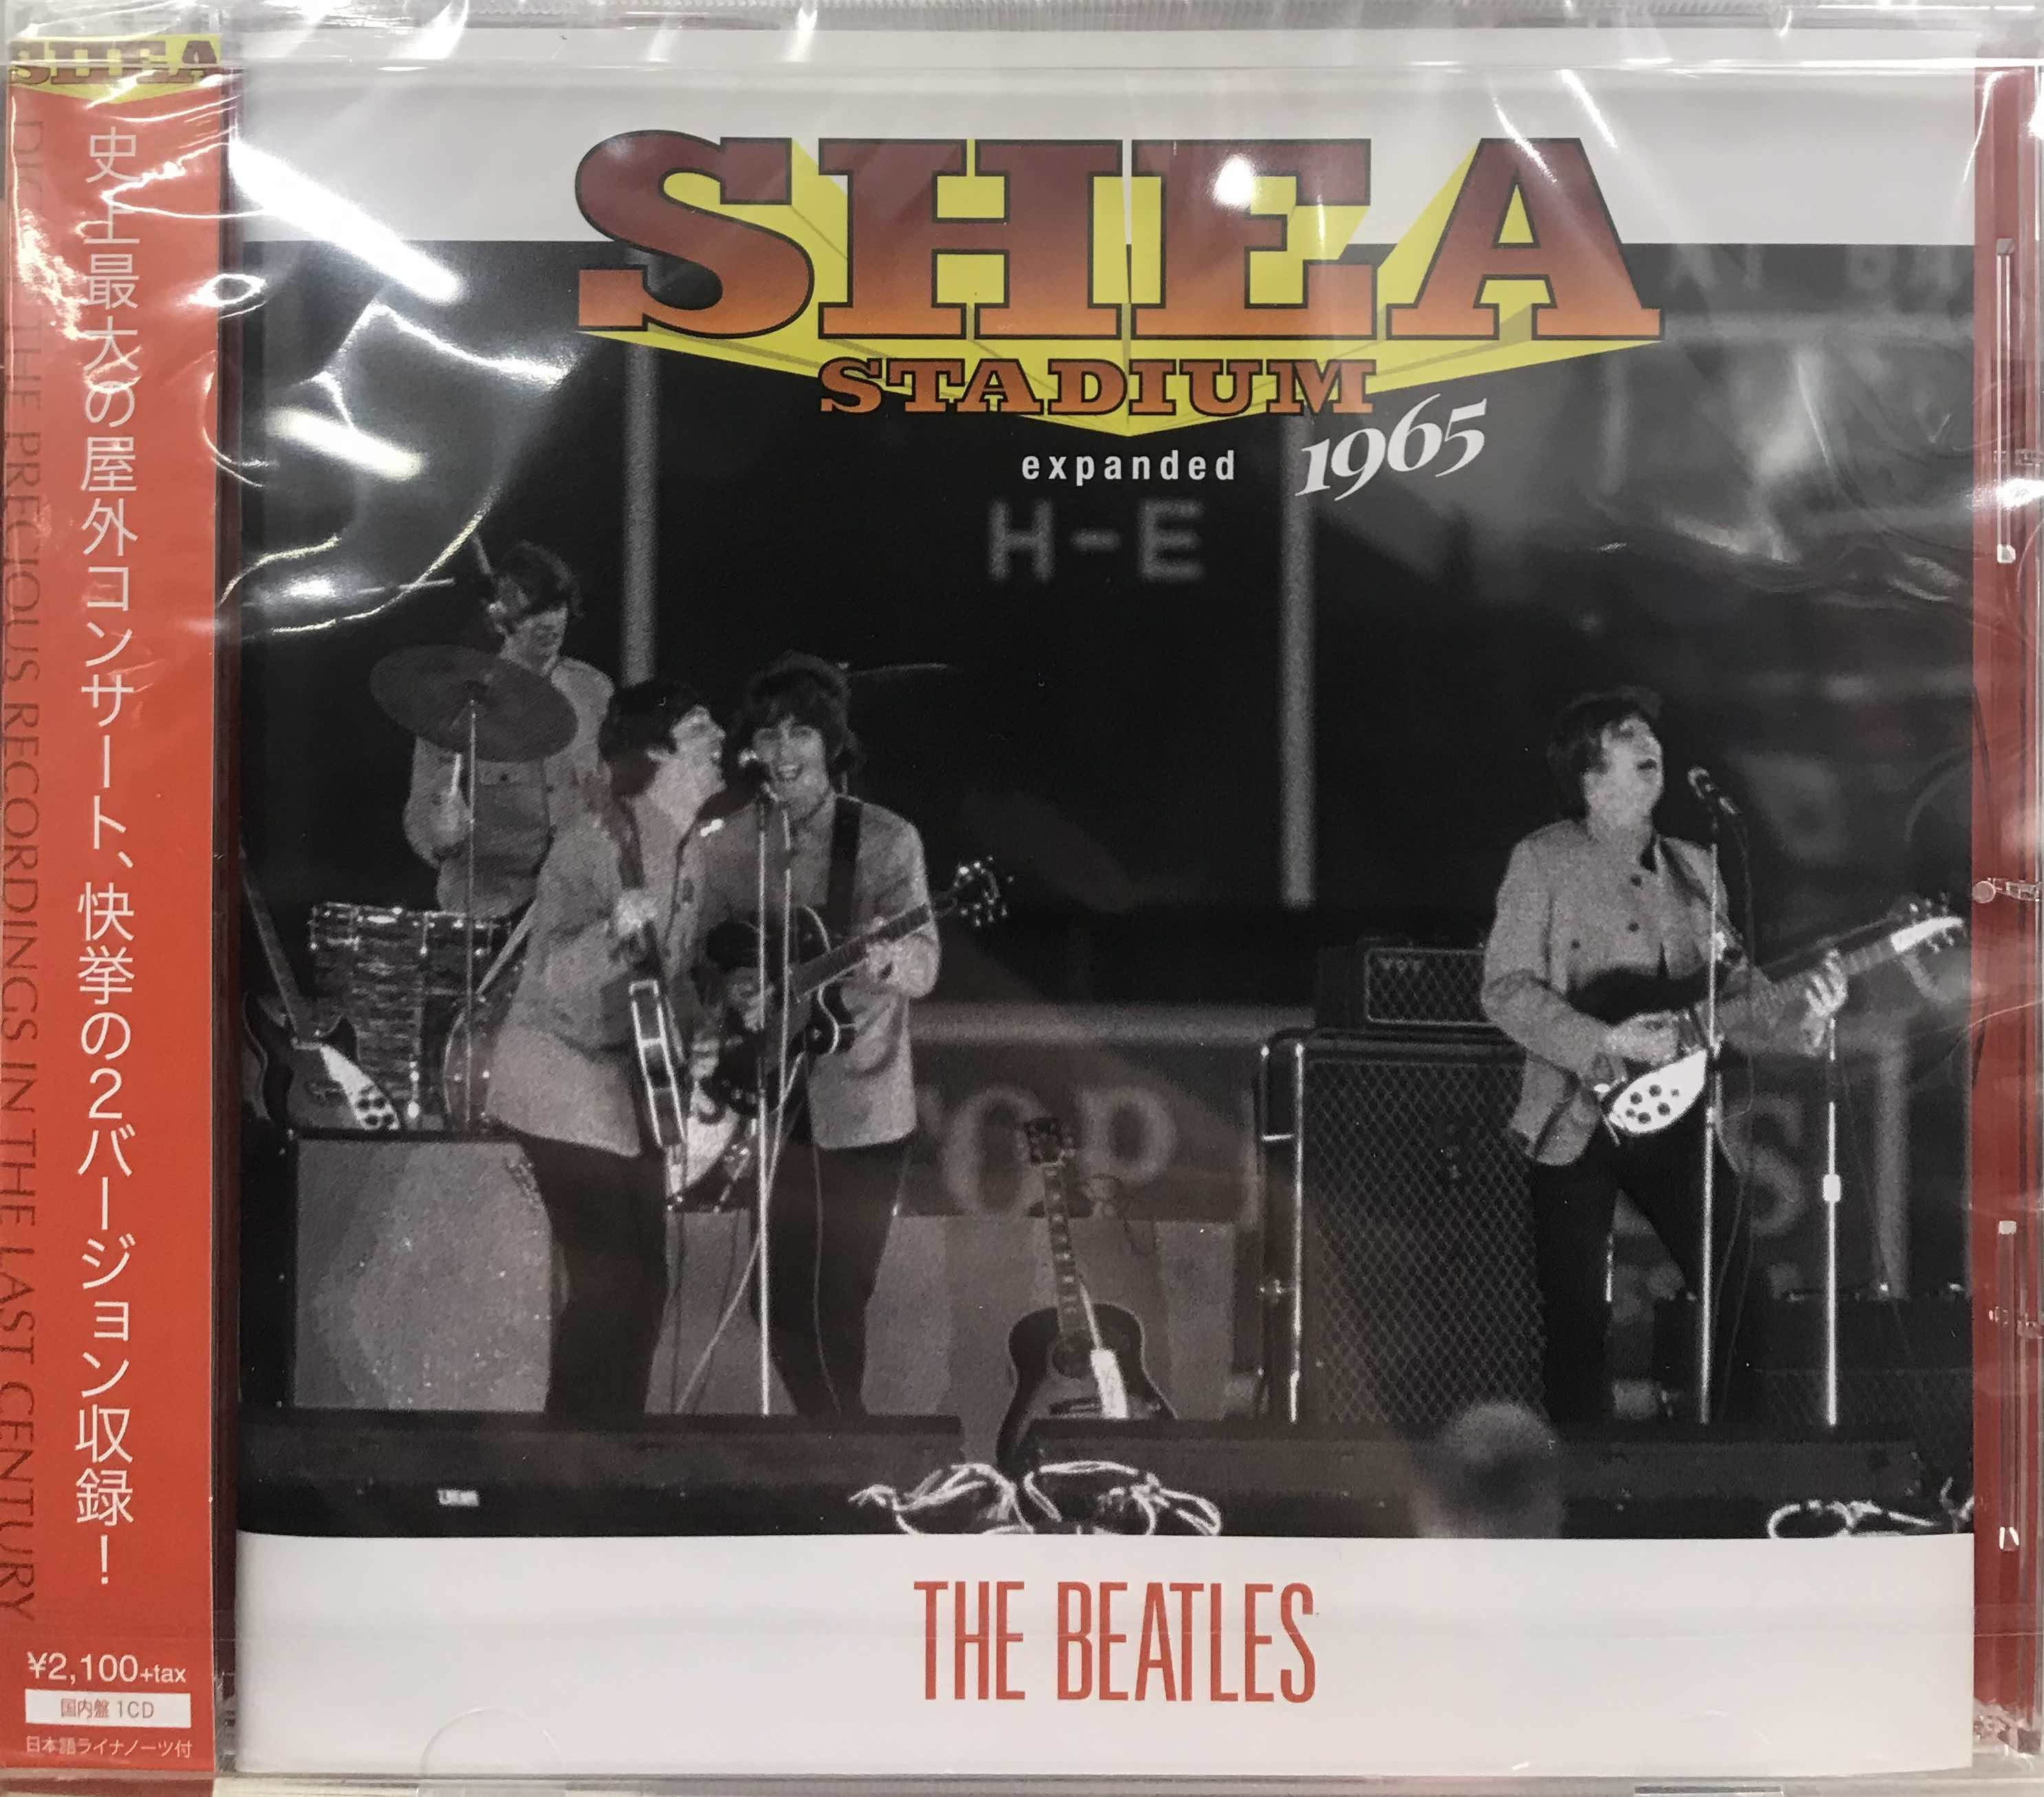 The Beatles - Live at Shea Stadium 1965  -  Expanded